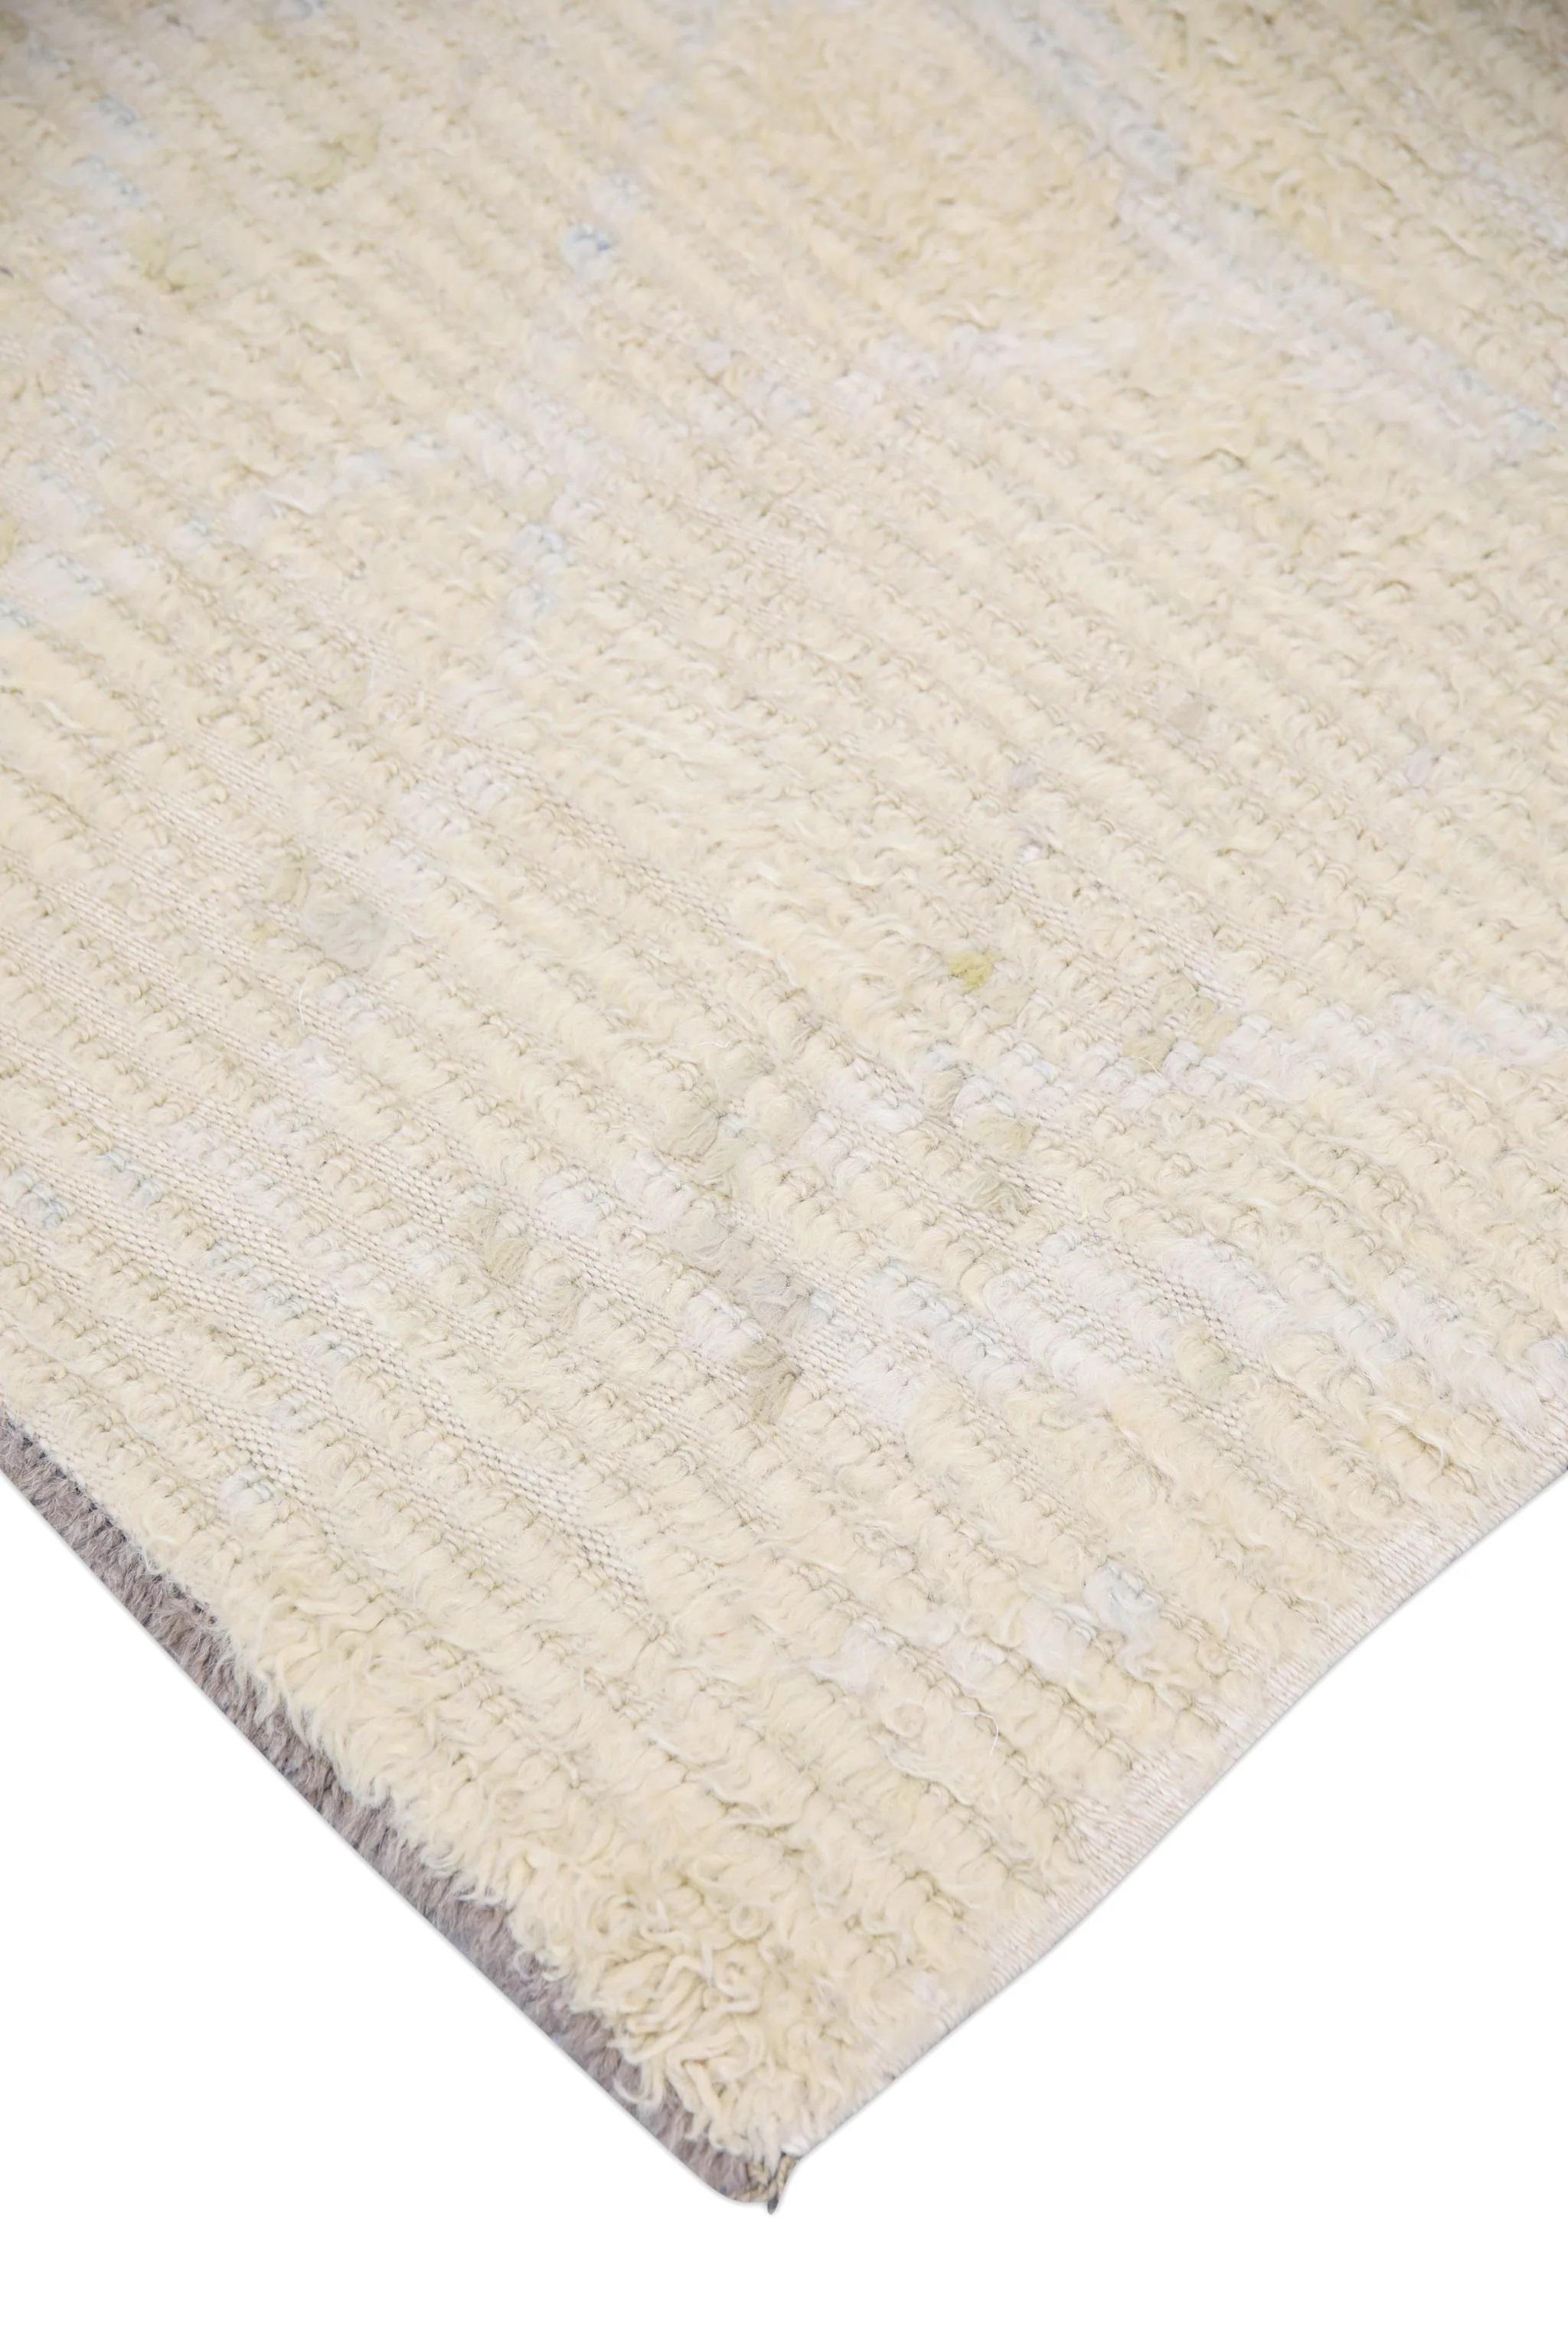 A stunning modern Turkish tulu rug that is sure to add a touch of warmth and luxury to any space. This rug has been meticulously handwoven using traditional techniques, ensuring its quality and durability.

The rug is made with 100% natural